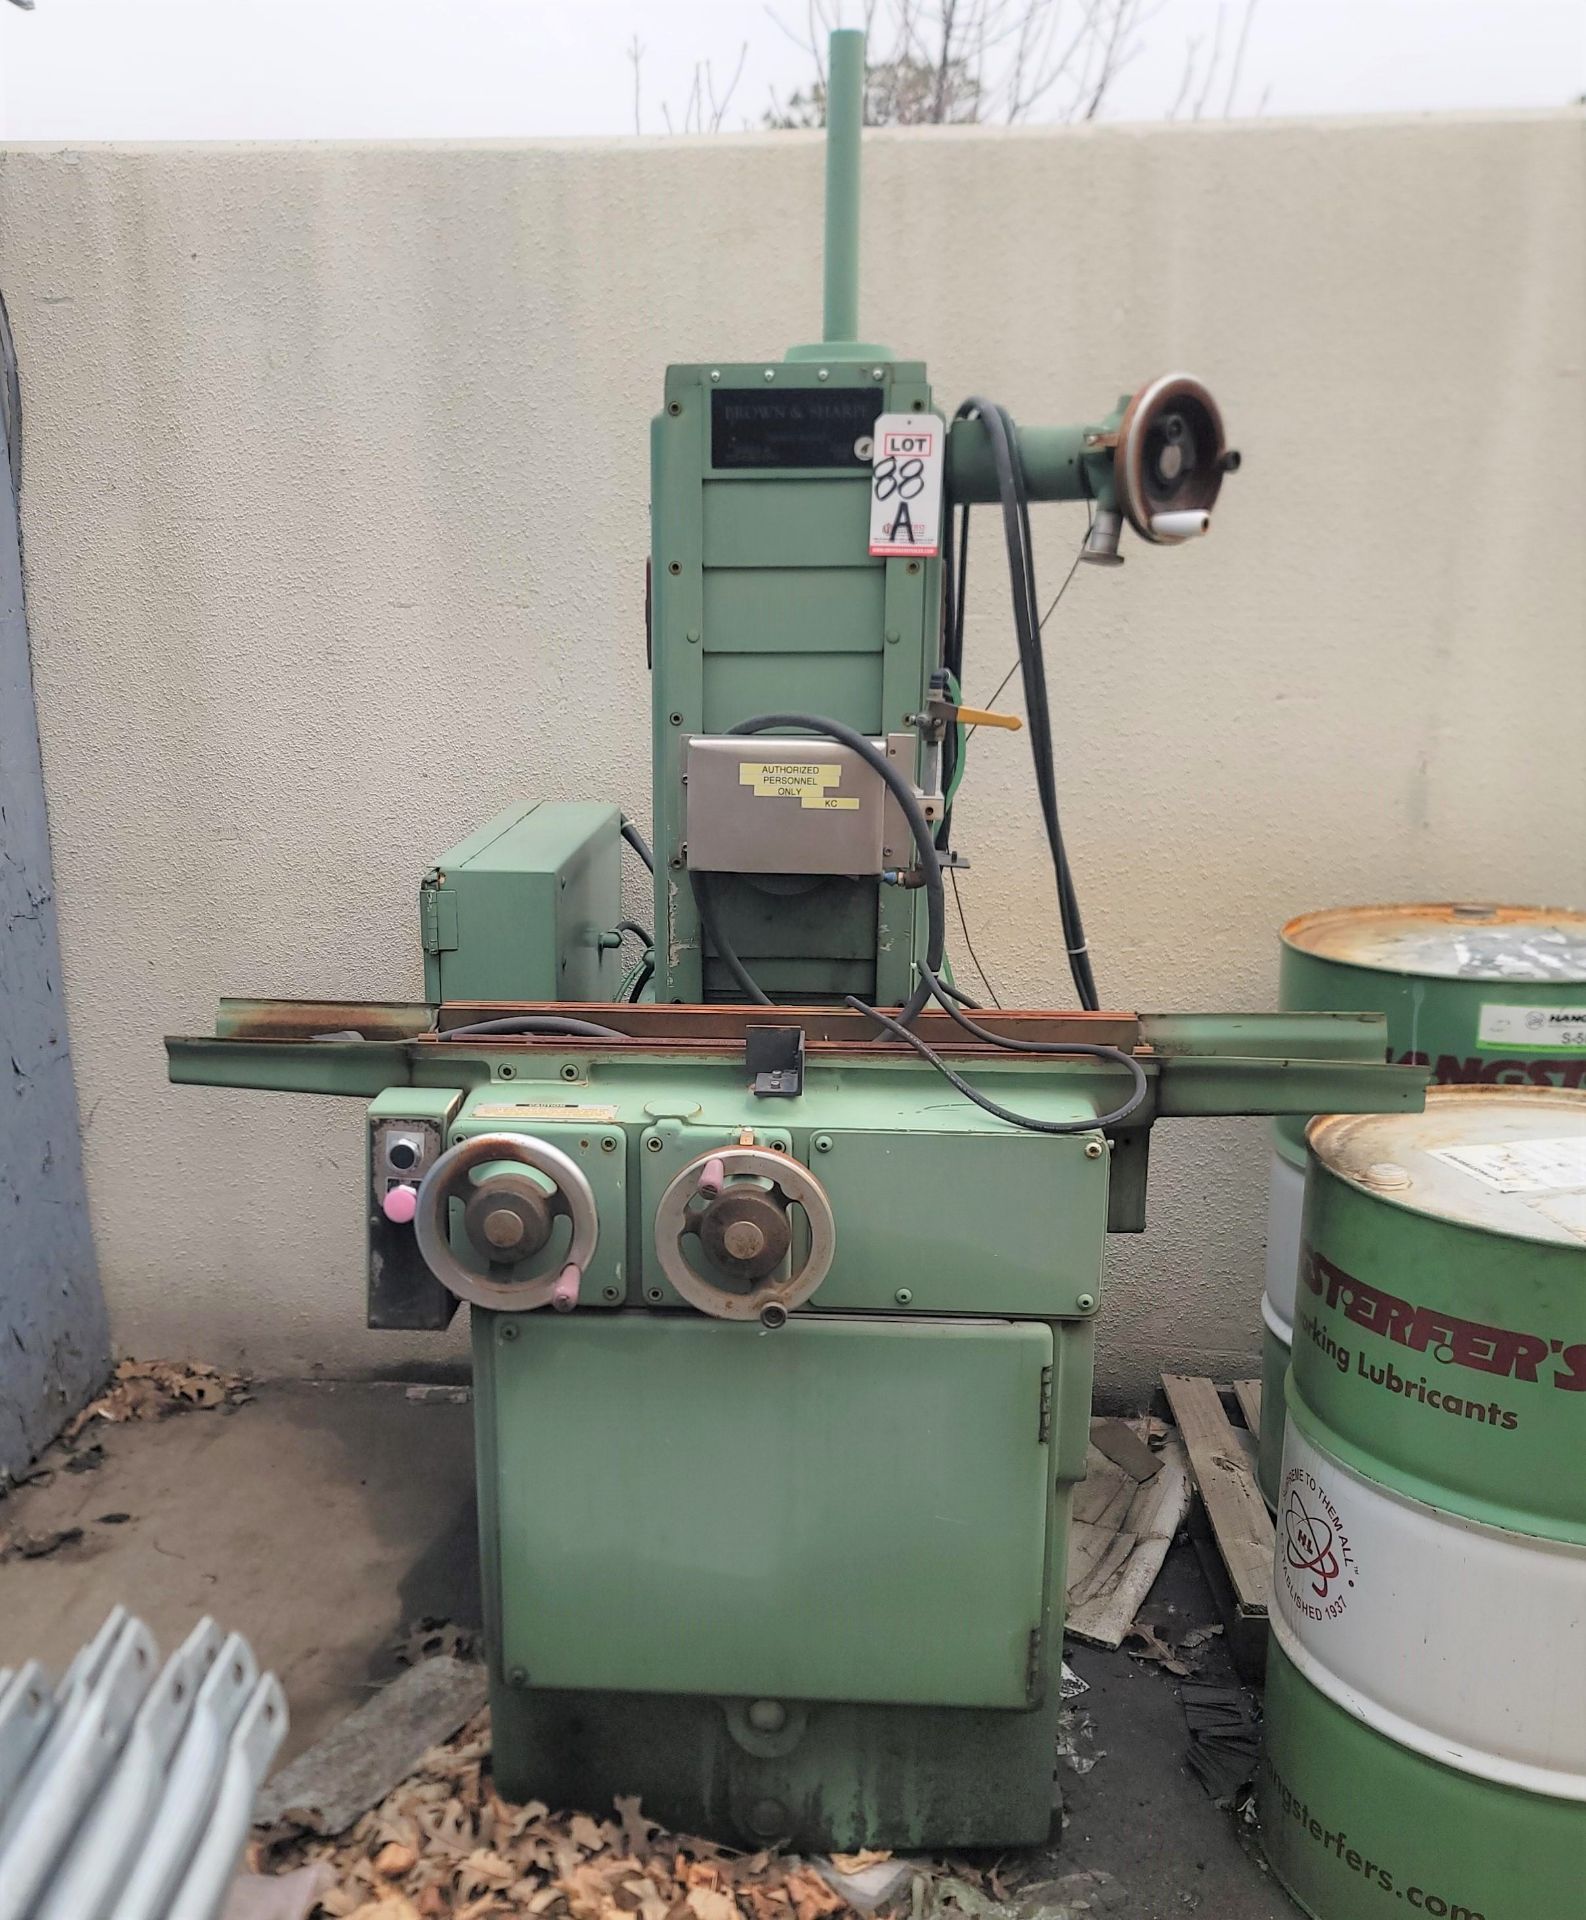 BROWN & SHARPE SURFACE GRINDER, NO MAGNETIC CHUCK, S/N 523-6180-1290, FACTORY REBUILT IN 1991, PARTS